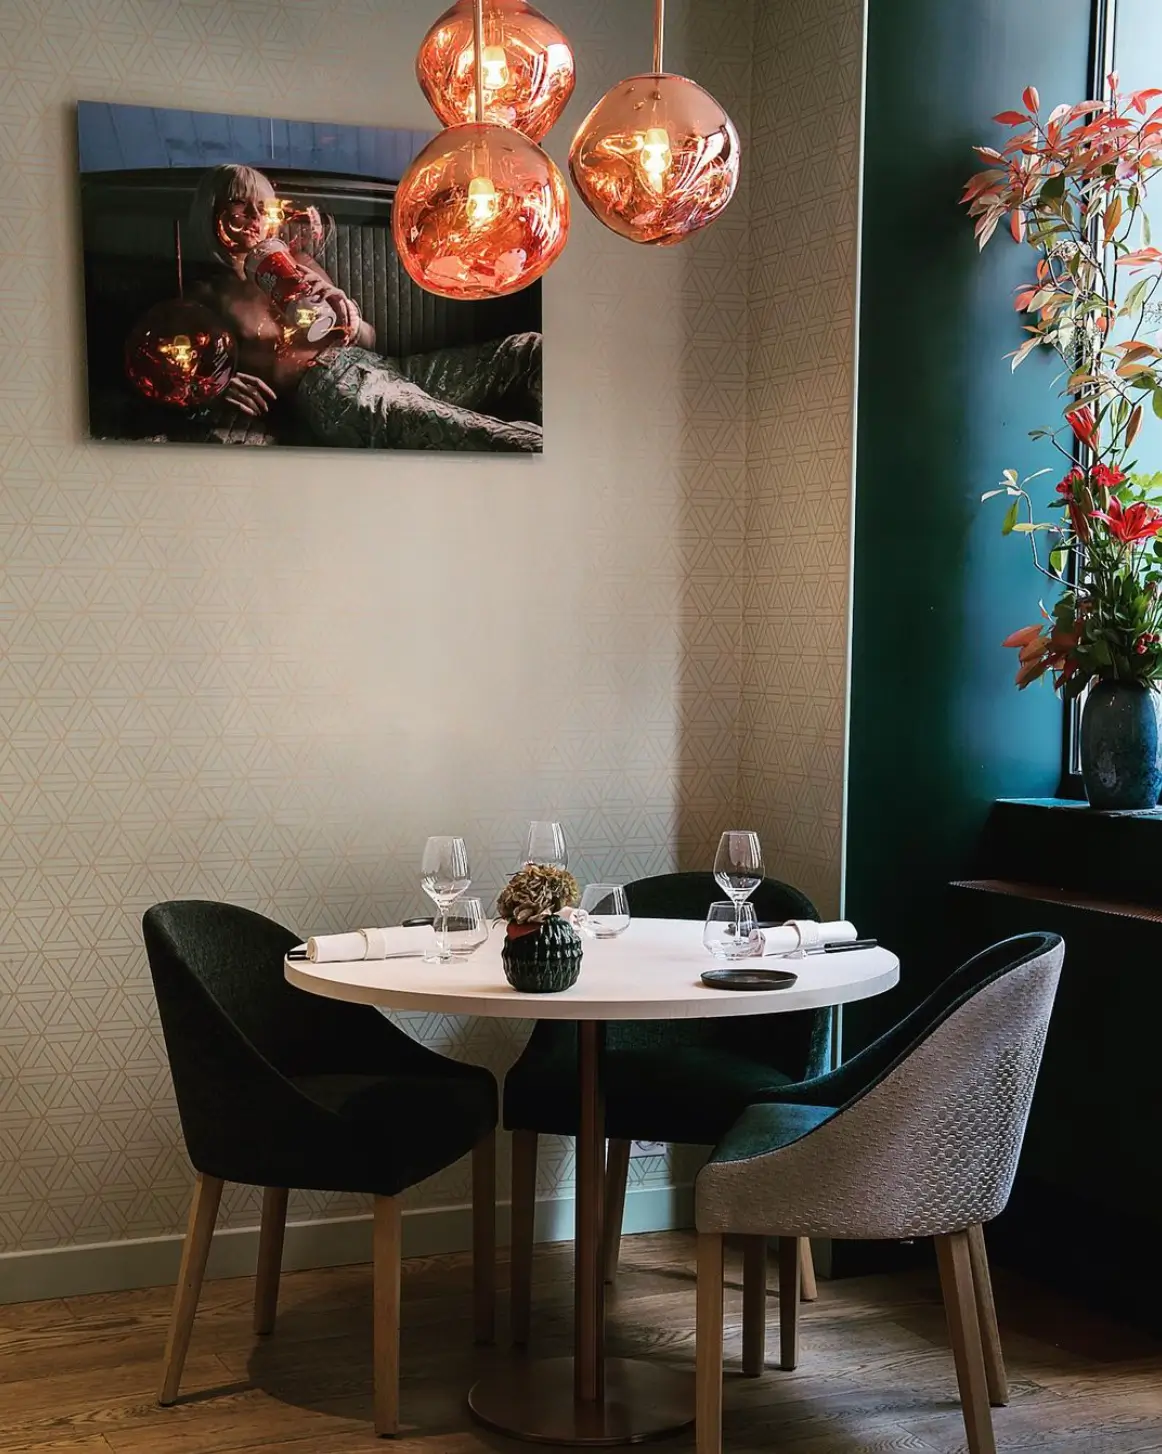 A cozy booth at Tomy & Co restaurant in Paris, an affordable Michelin star restaurant, with a round table set for dining, featuring a vibrant painting and lush green plant.